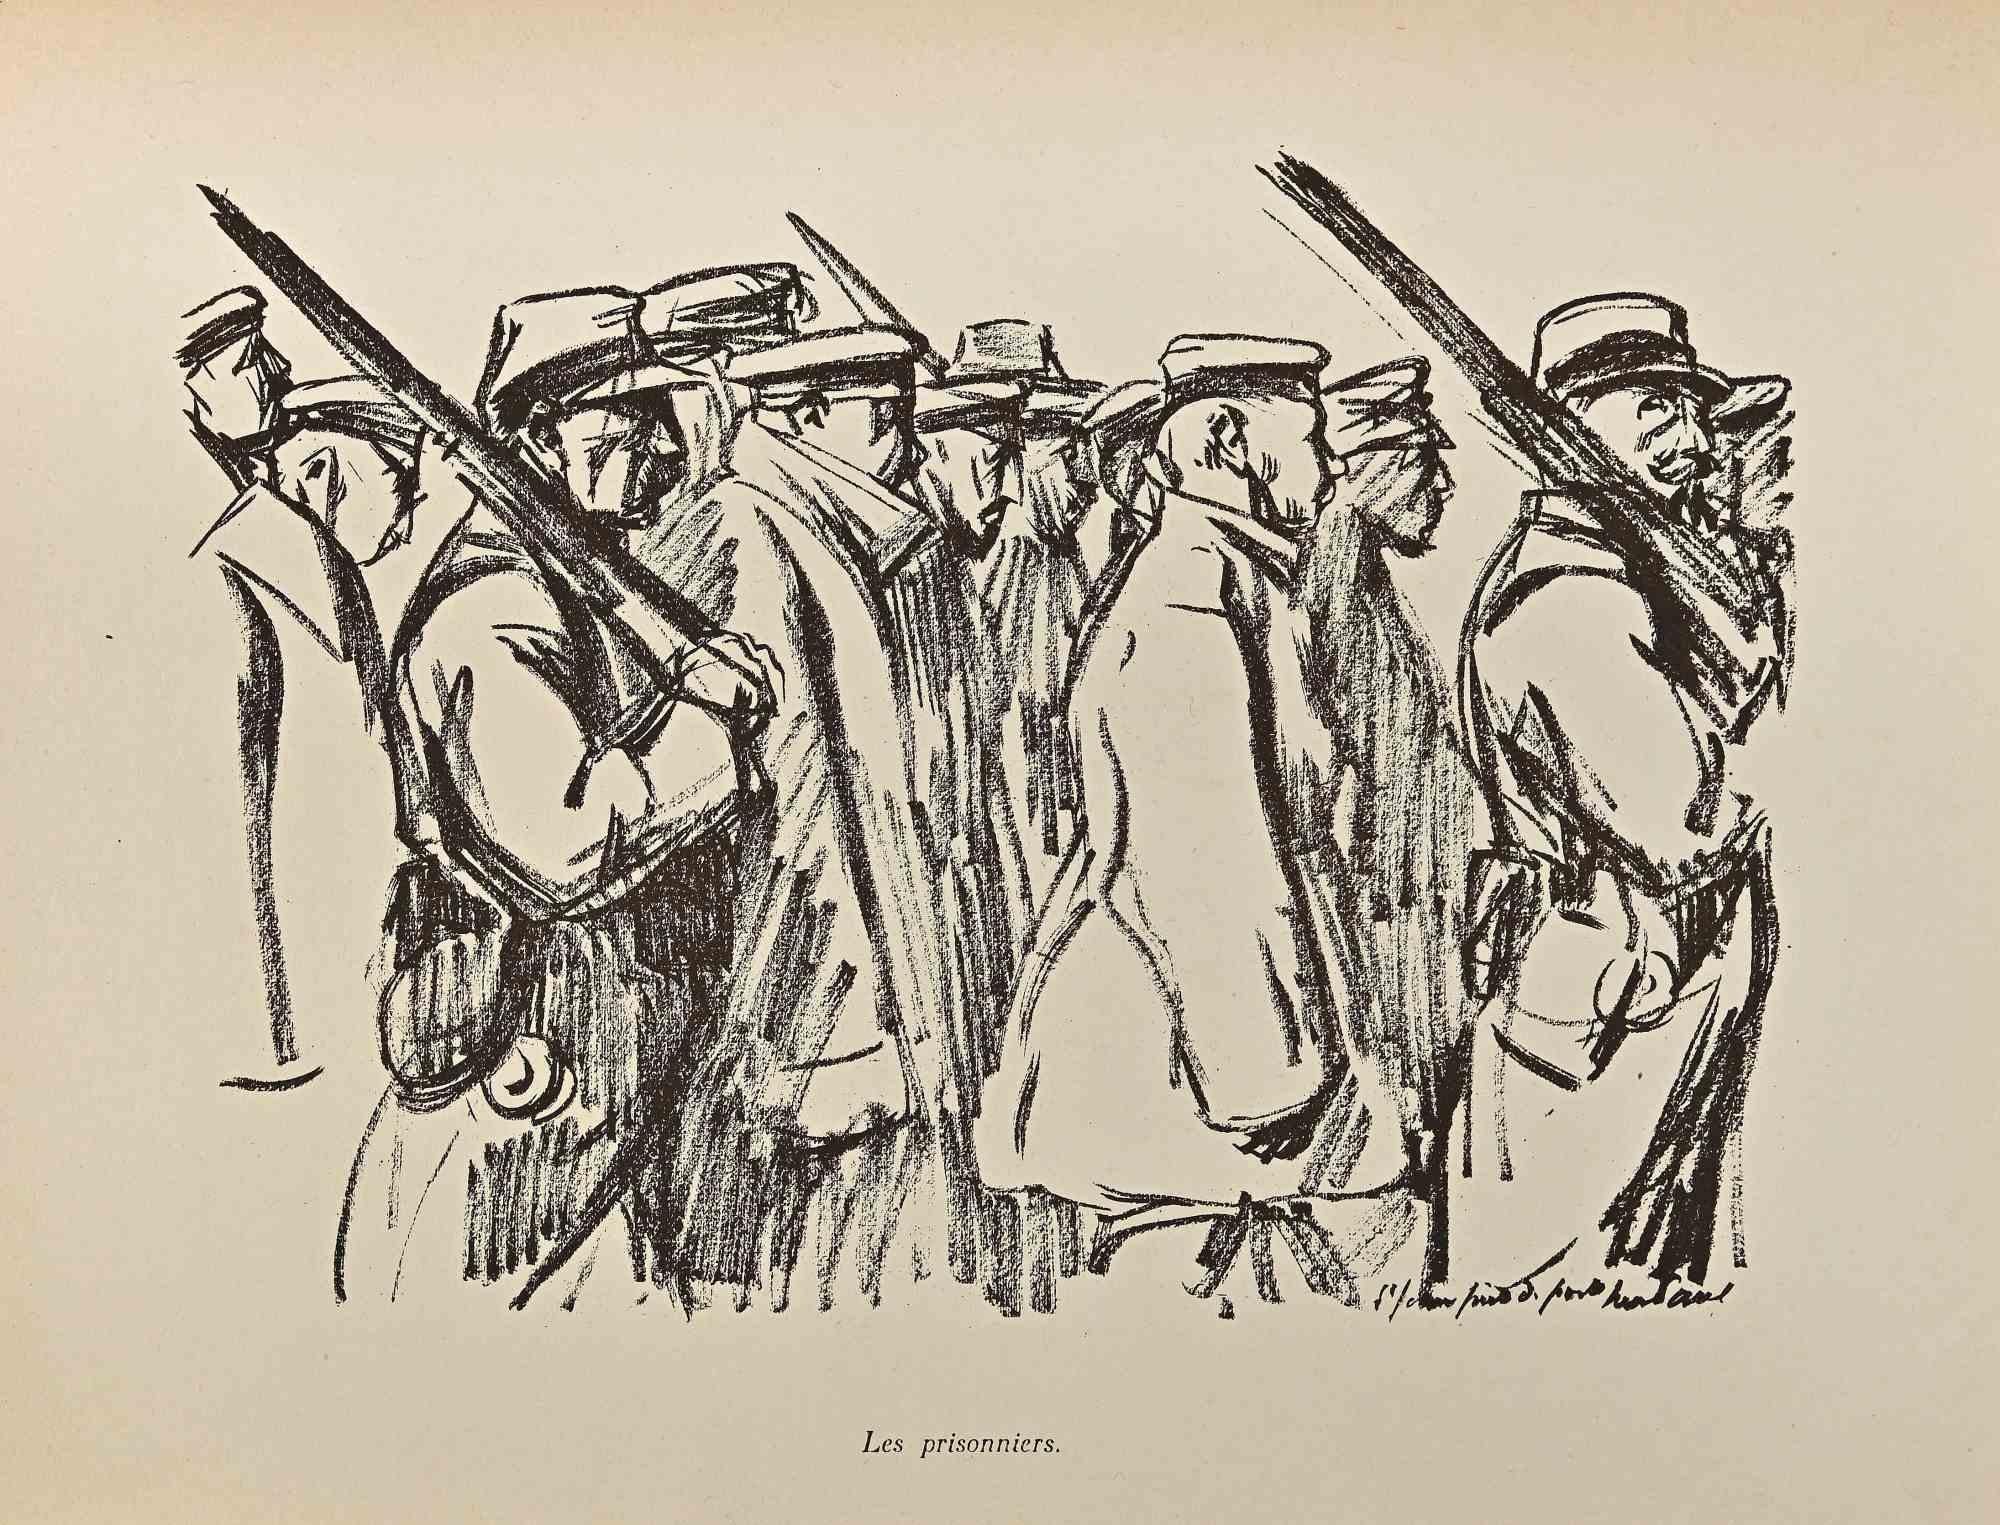 Les Prisonniers is a vintage Lithograph realized by Hermann Paul from the series " La Grande Guerre Par Les Artistes"

Good condition on a yellowed cardboard.

Monogrammed and titled on the lower margin, number 8 of fourth collection.

René Georges